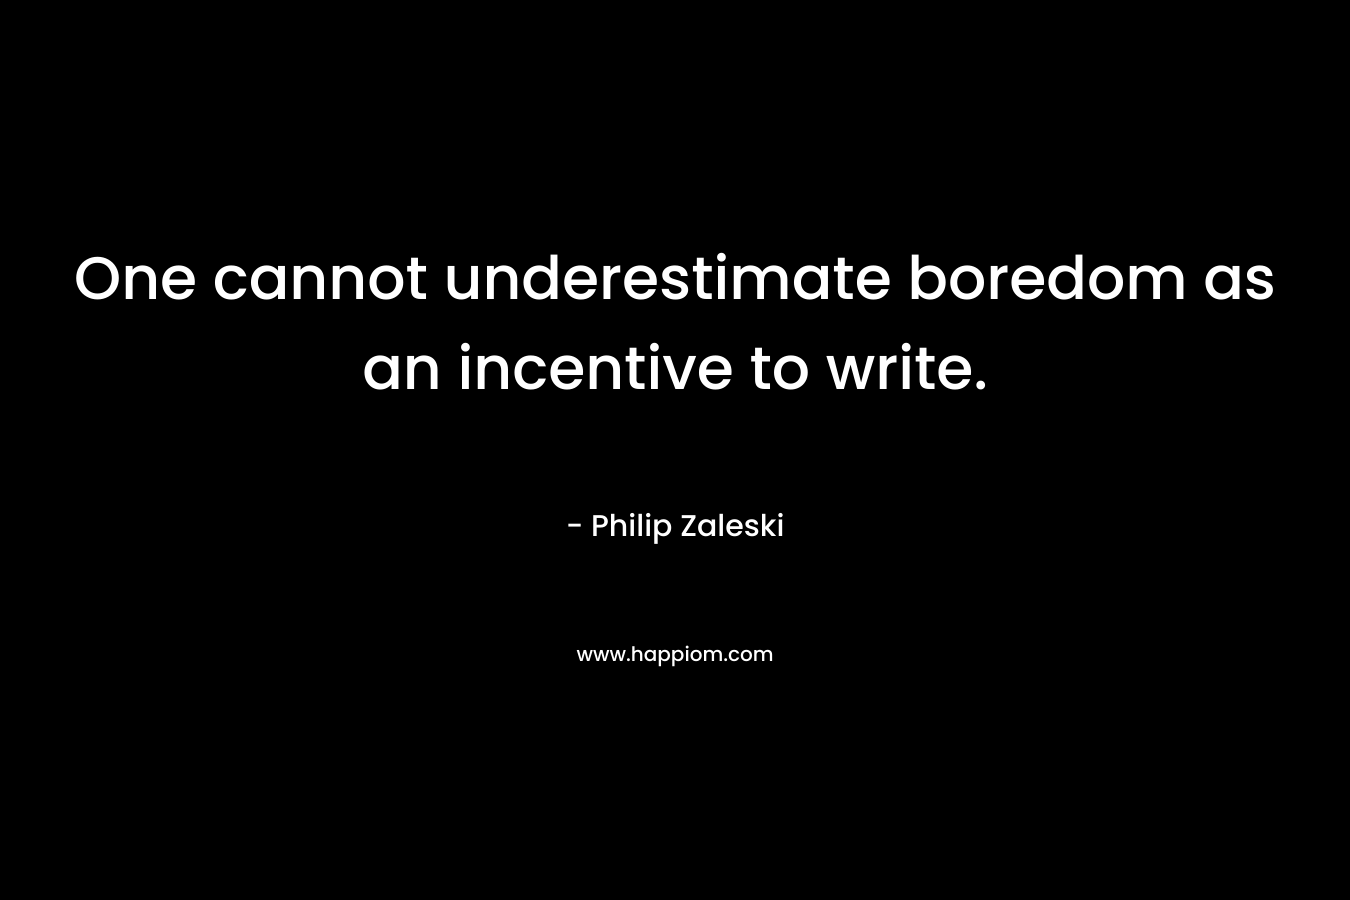 One cannot underestimate boredom as an incentive to write. – Philip Zaleski